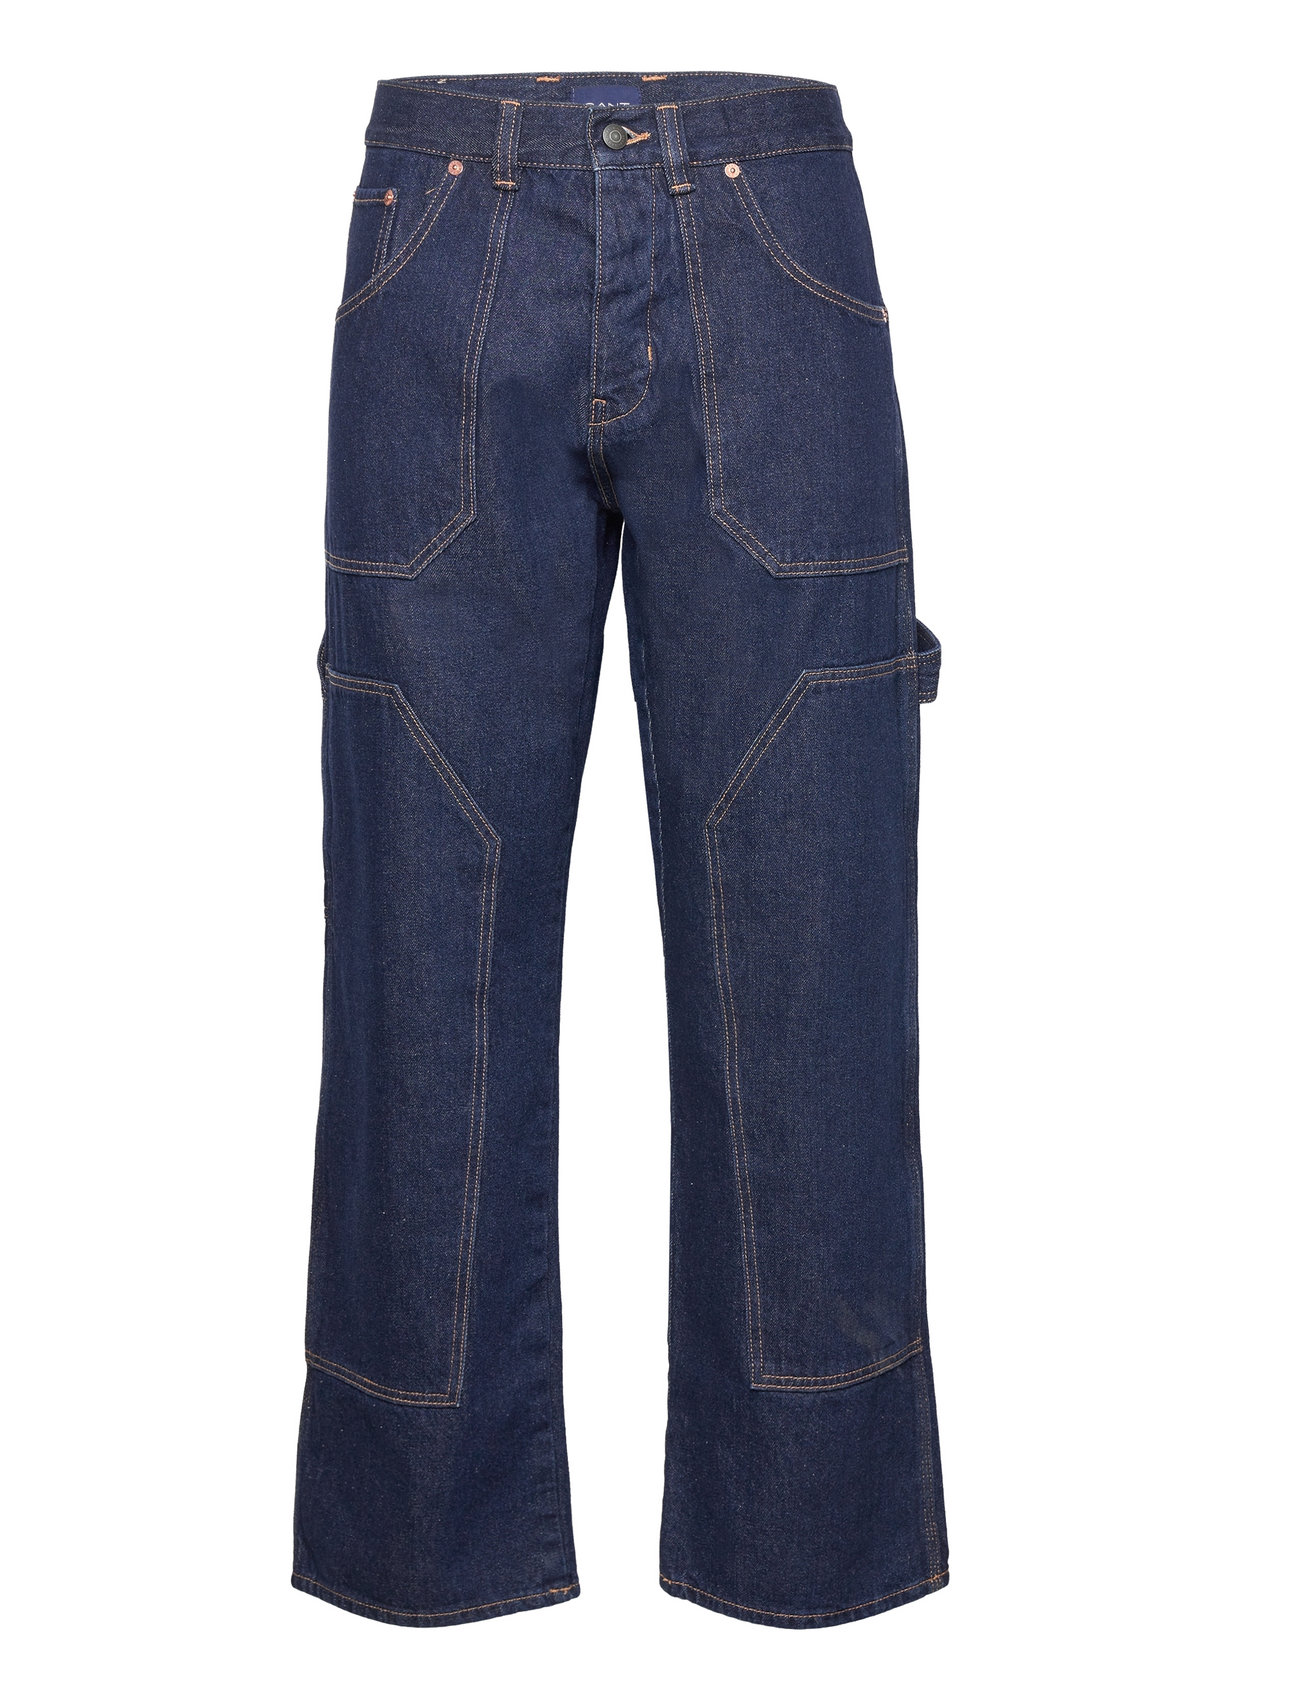 GANT "Workers Jeans Bottoms Relaxed Blue GANT"